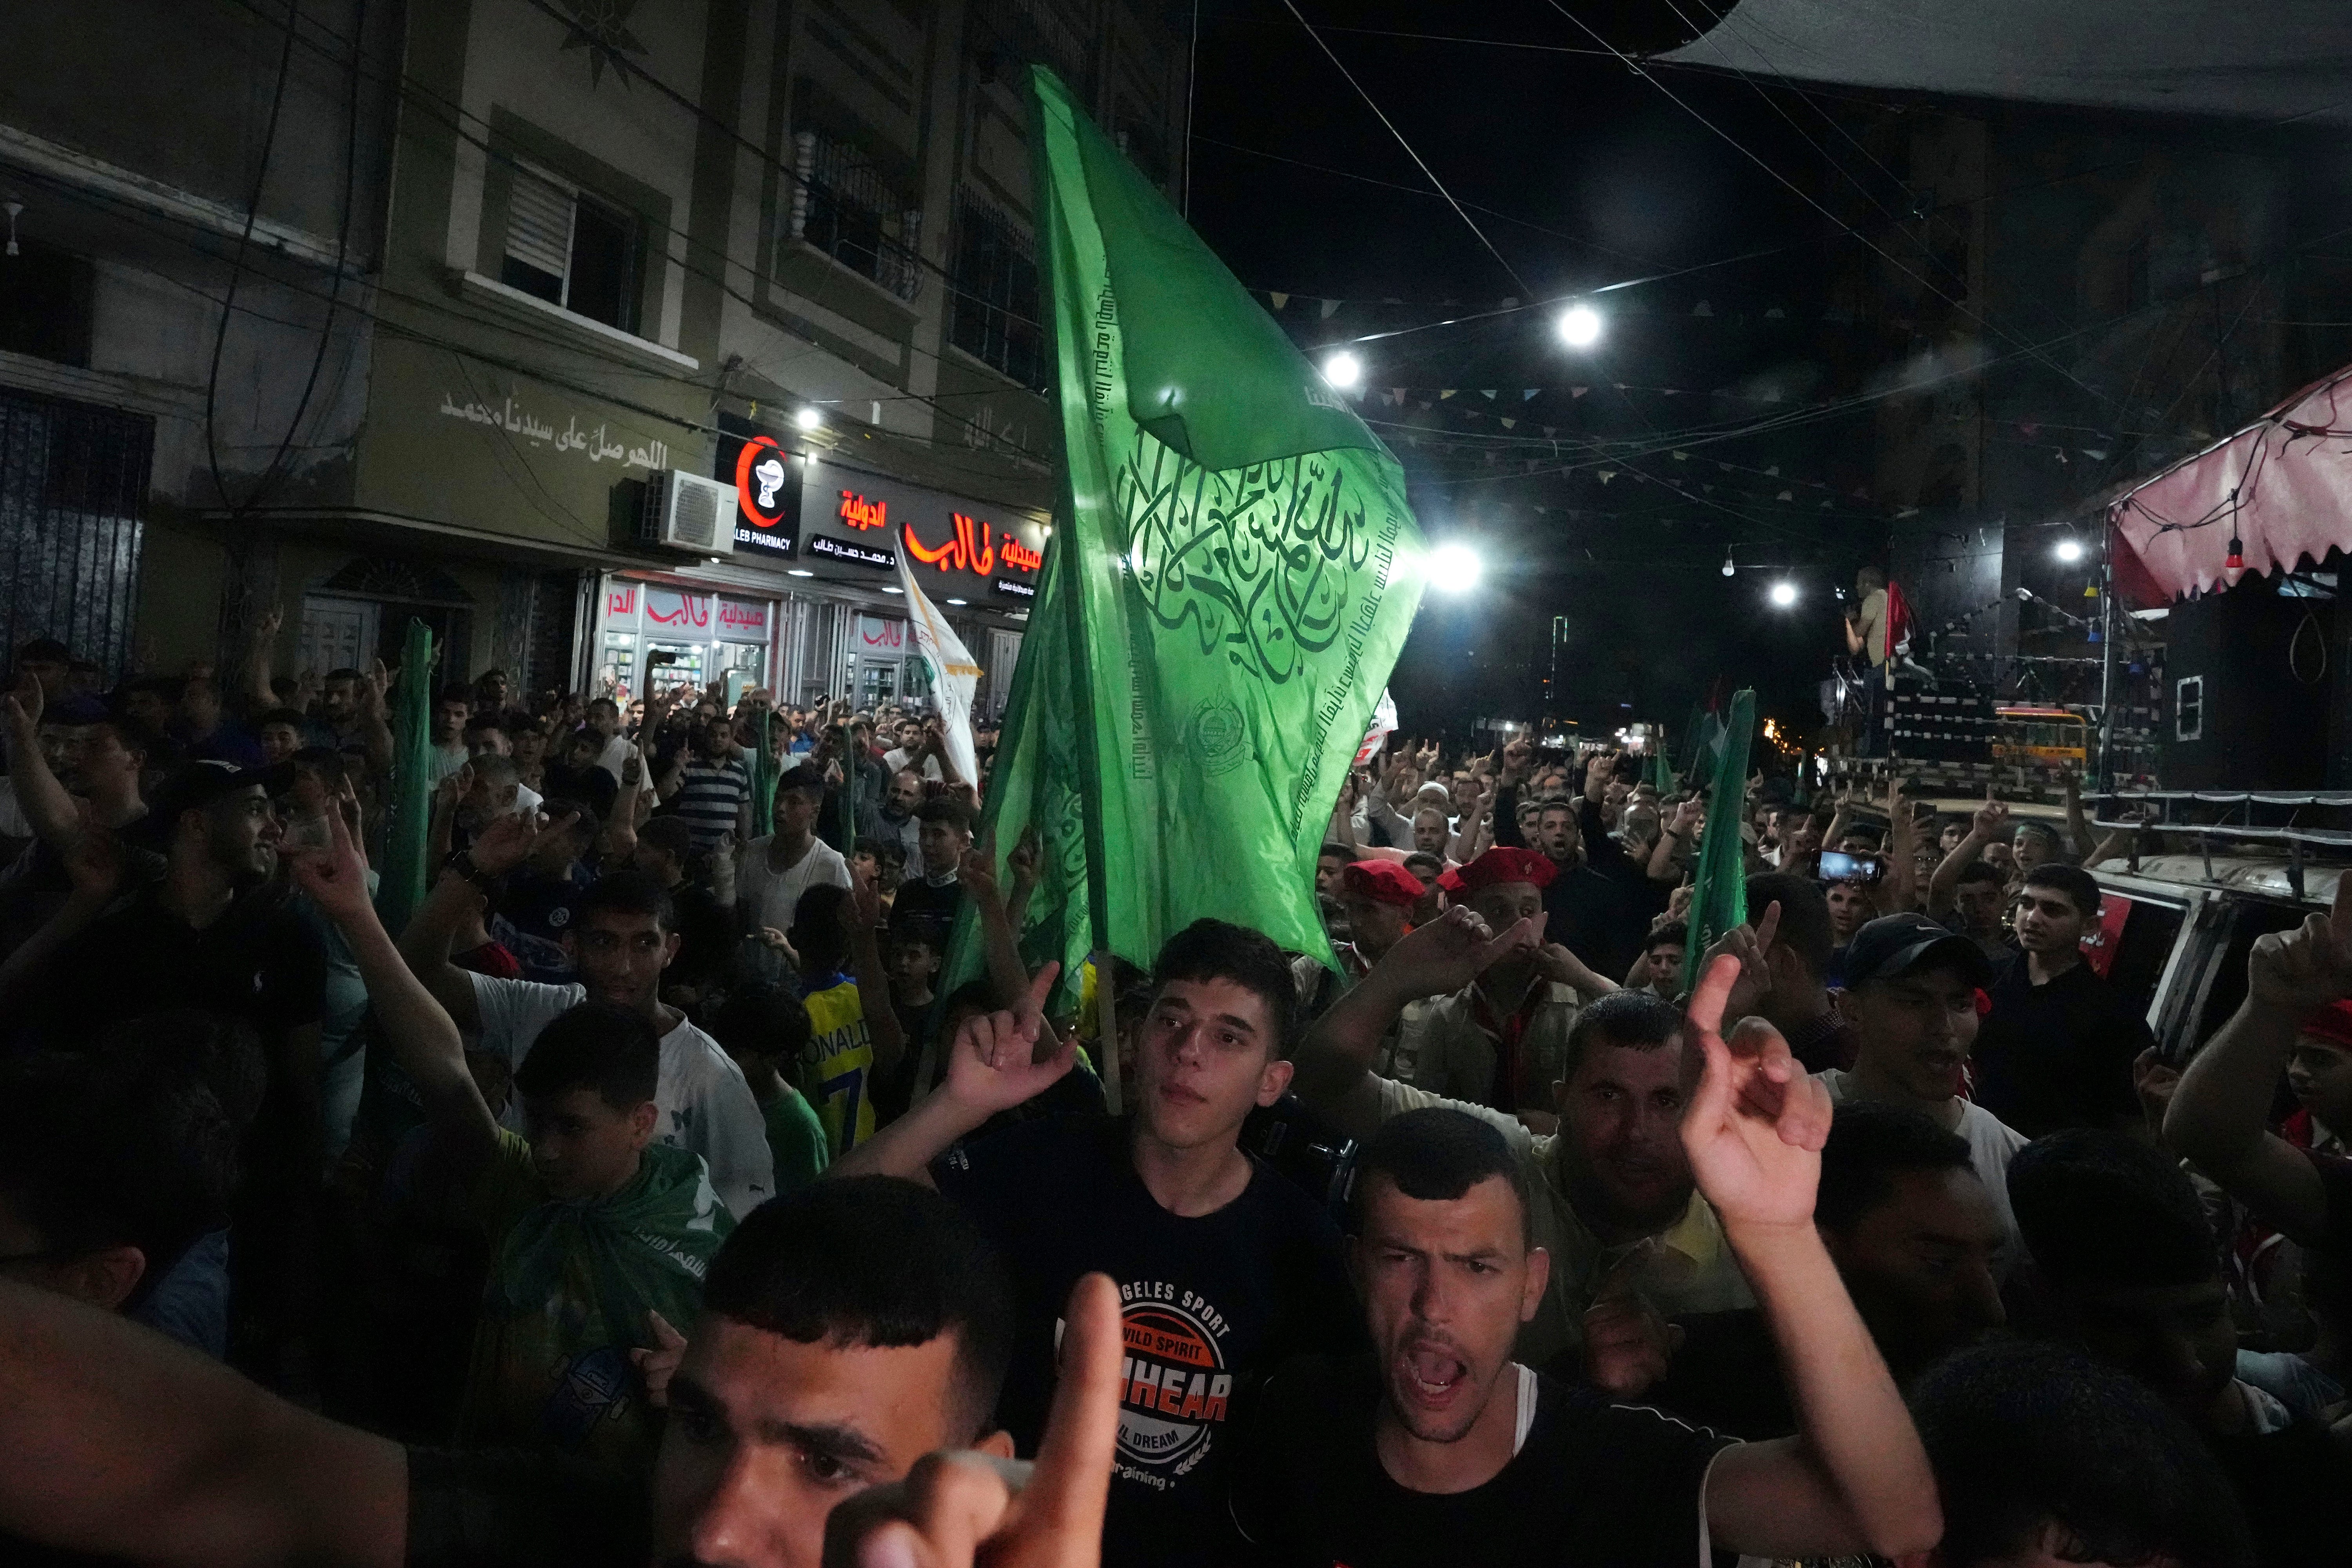 Hamas supporters wave green Islamic flags while raise their hands up and chant slogans